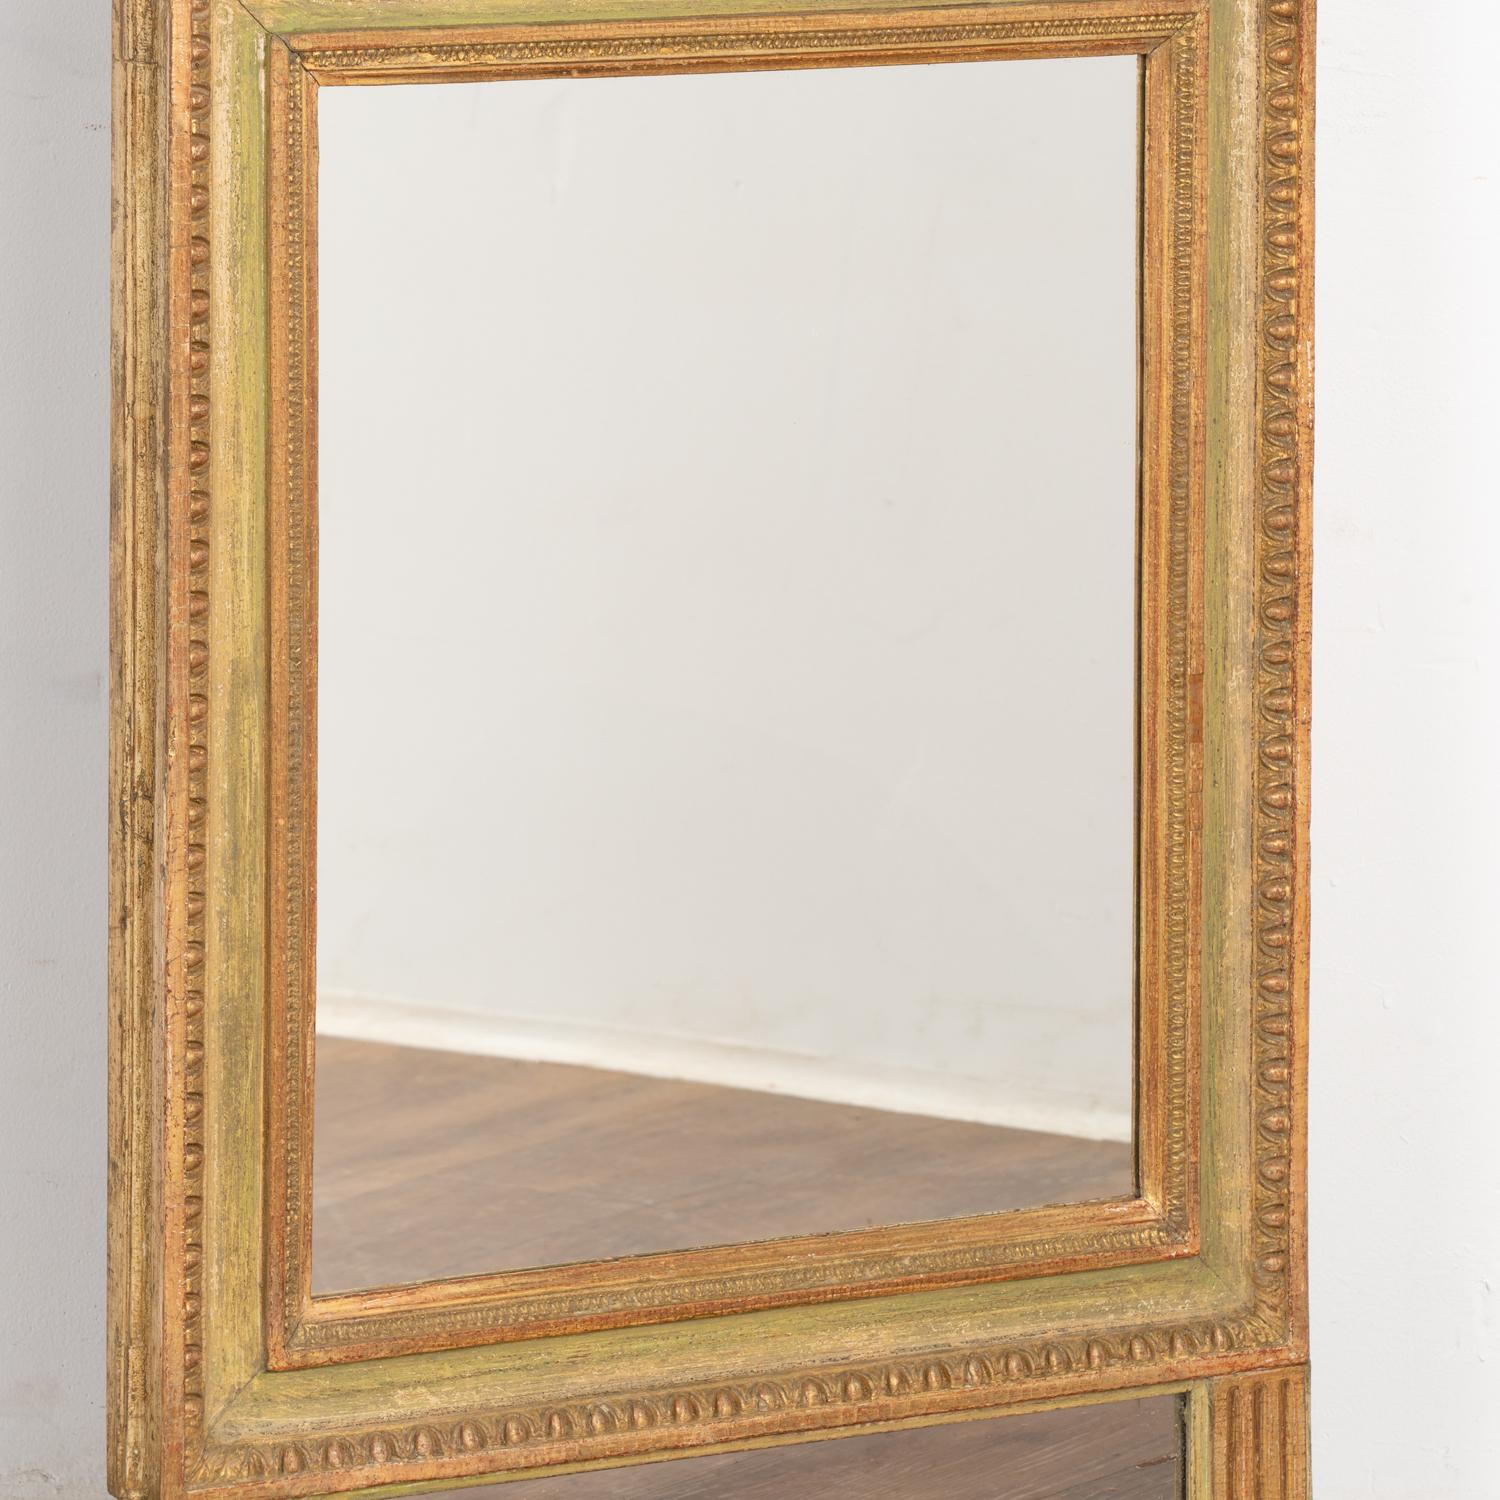 Gold and Green Painted Trumeau Mirror, Sweden circa 1820-40 For Sale 3